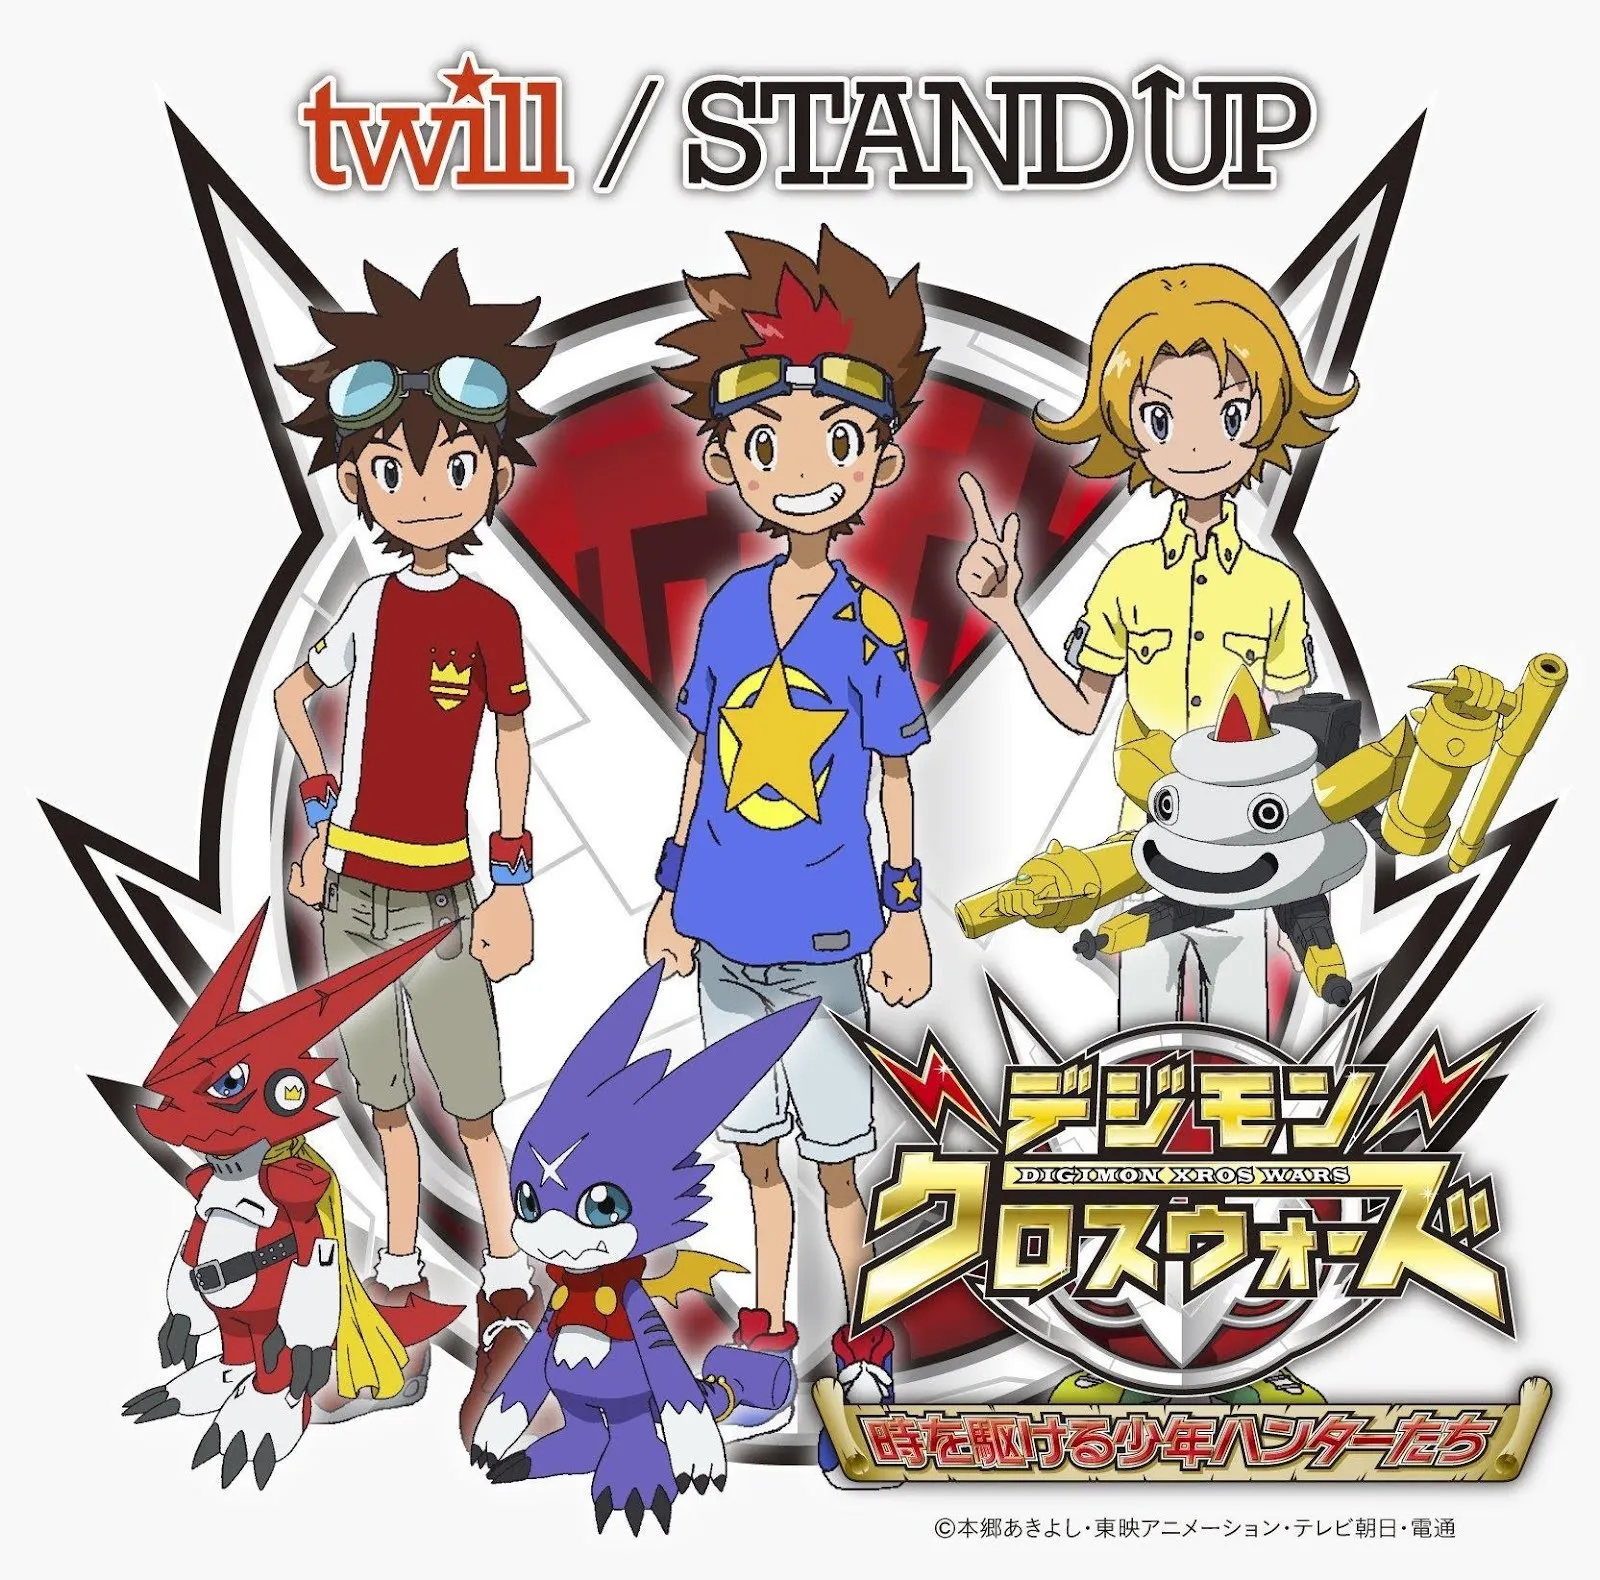 STAND UP / twill